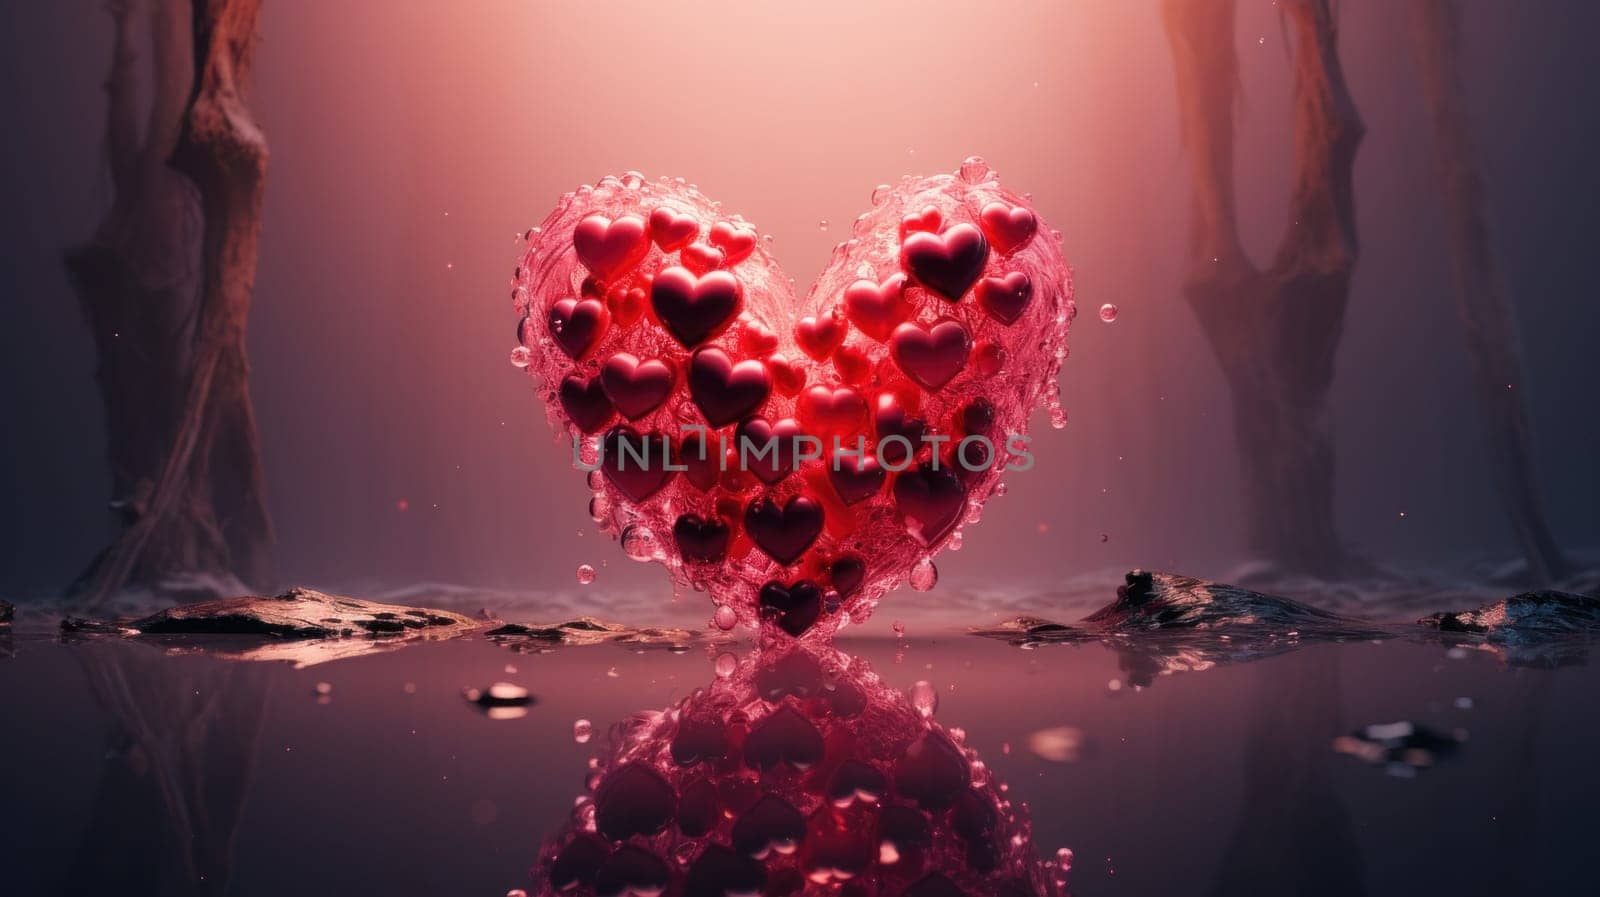 A heart shaped object with many red hearts floating in water